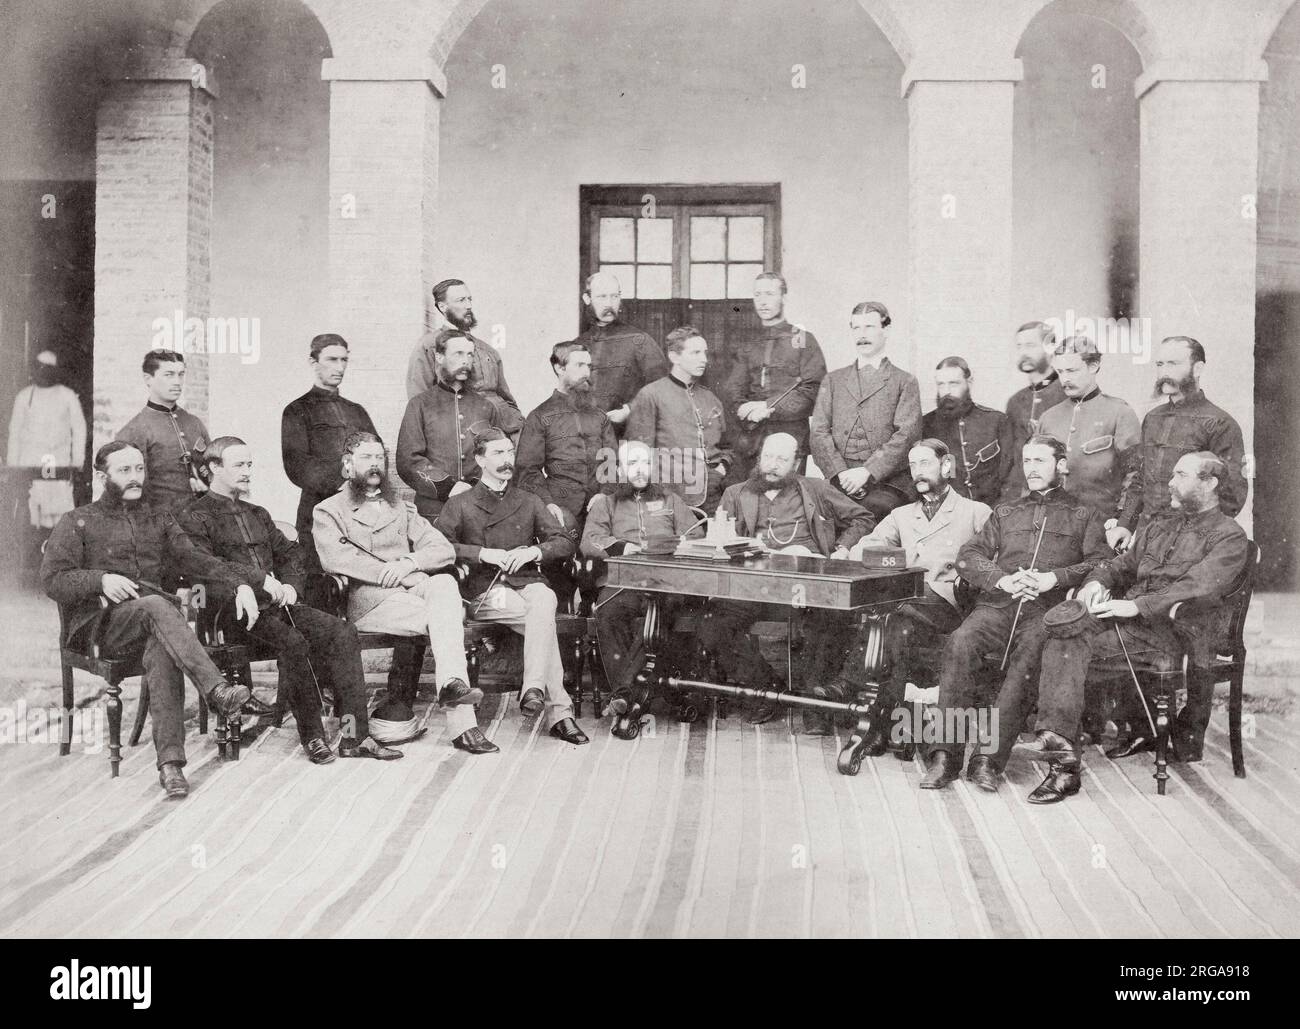 Vintage 19th century photograph - British army in India, 1860s - officers of the 58th Regiment 1869 Stock Photo